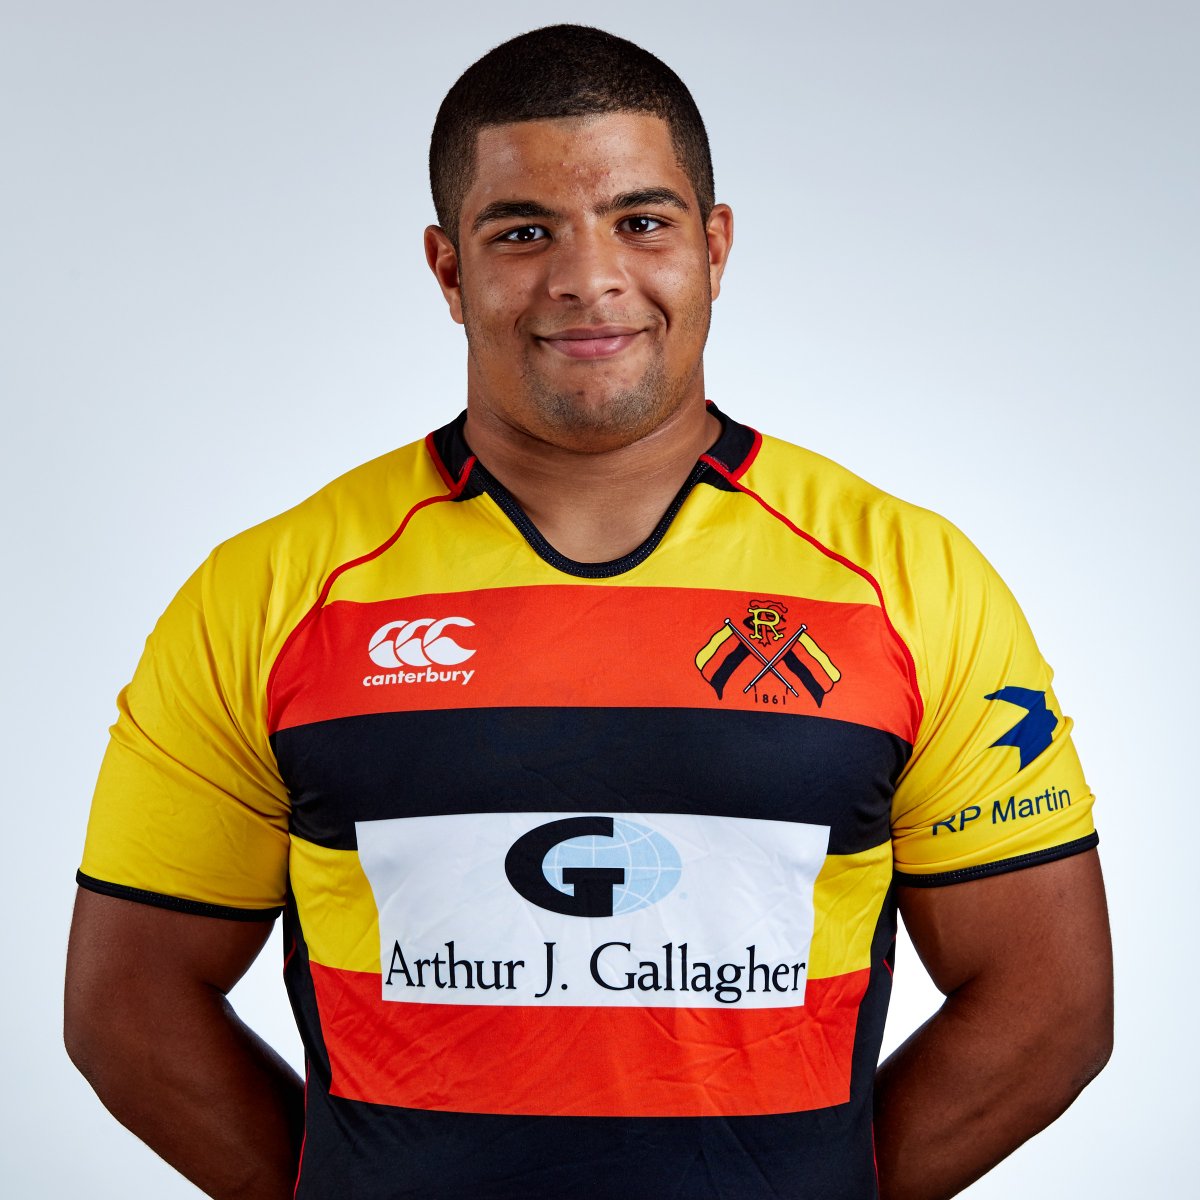 This Sunday 21st April, Thomas Munns will be running the London Marathon in aid of @sebsfoundation and in memory of former Richmond player, Seb Adeniran-Olule. Please donate by the link below 👇 ➡️ tinyurl.com/4c2zmwr3 #thisisrichmond 💛❤️🖤